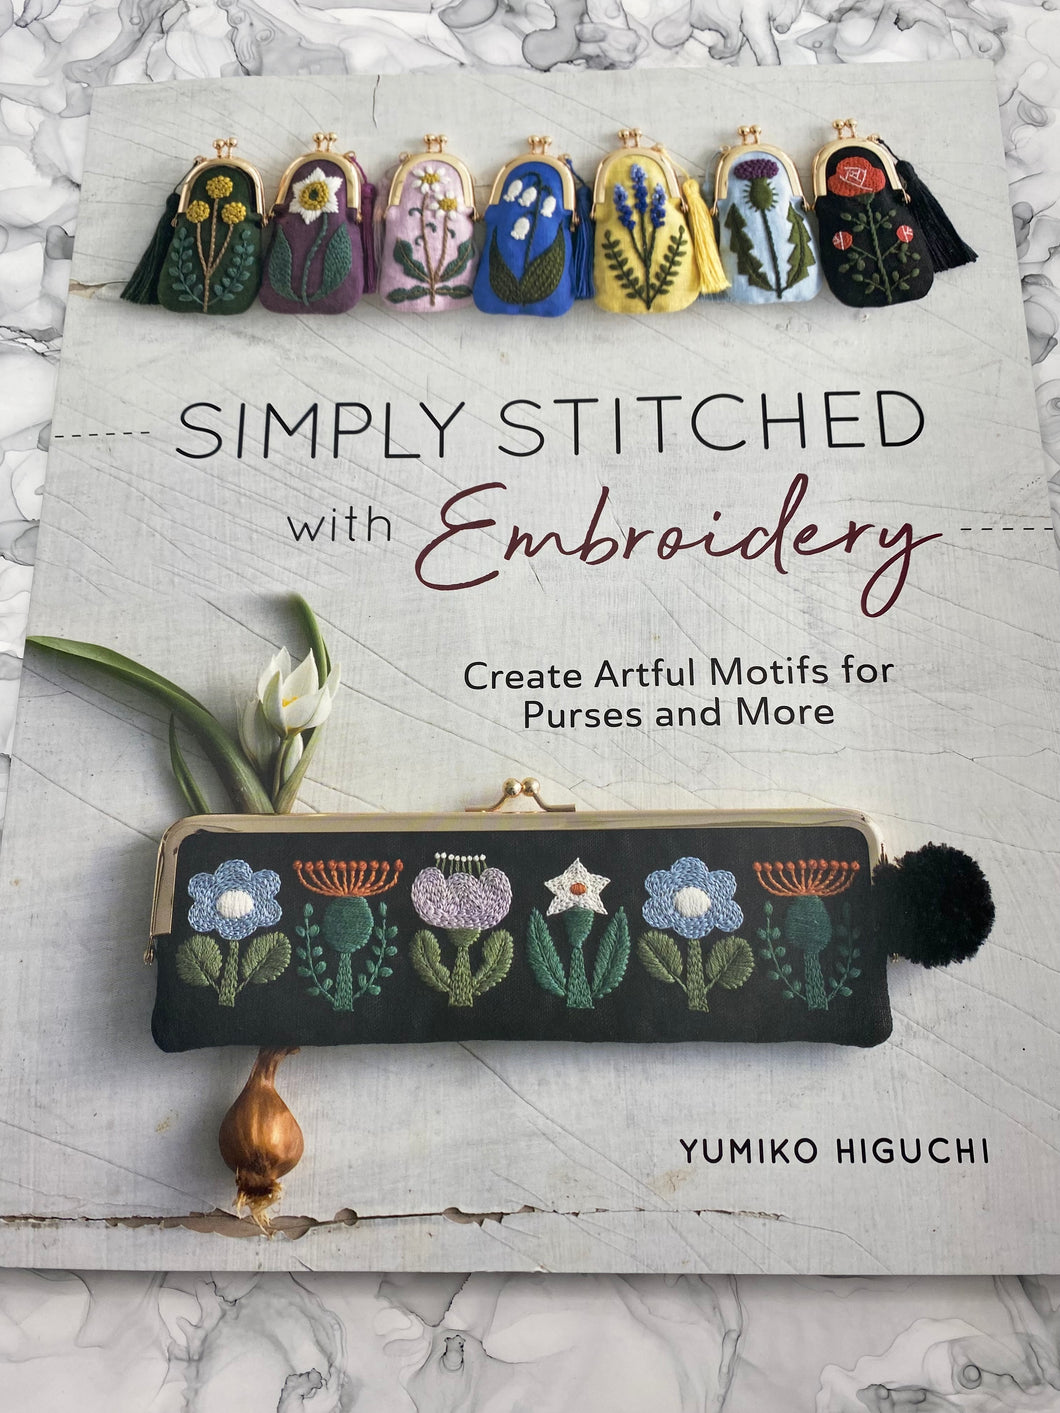 Simply Stitched with Embroidery: Create Artful Motifs for Purses and More by Yumiko Higuchi